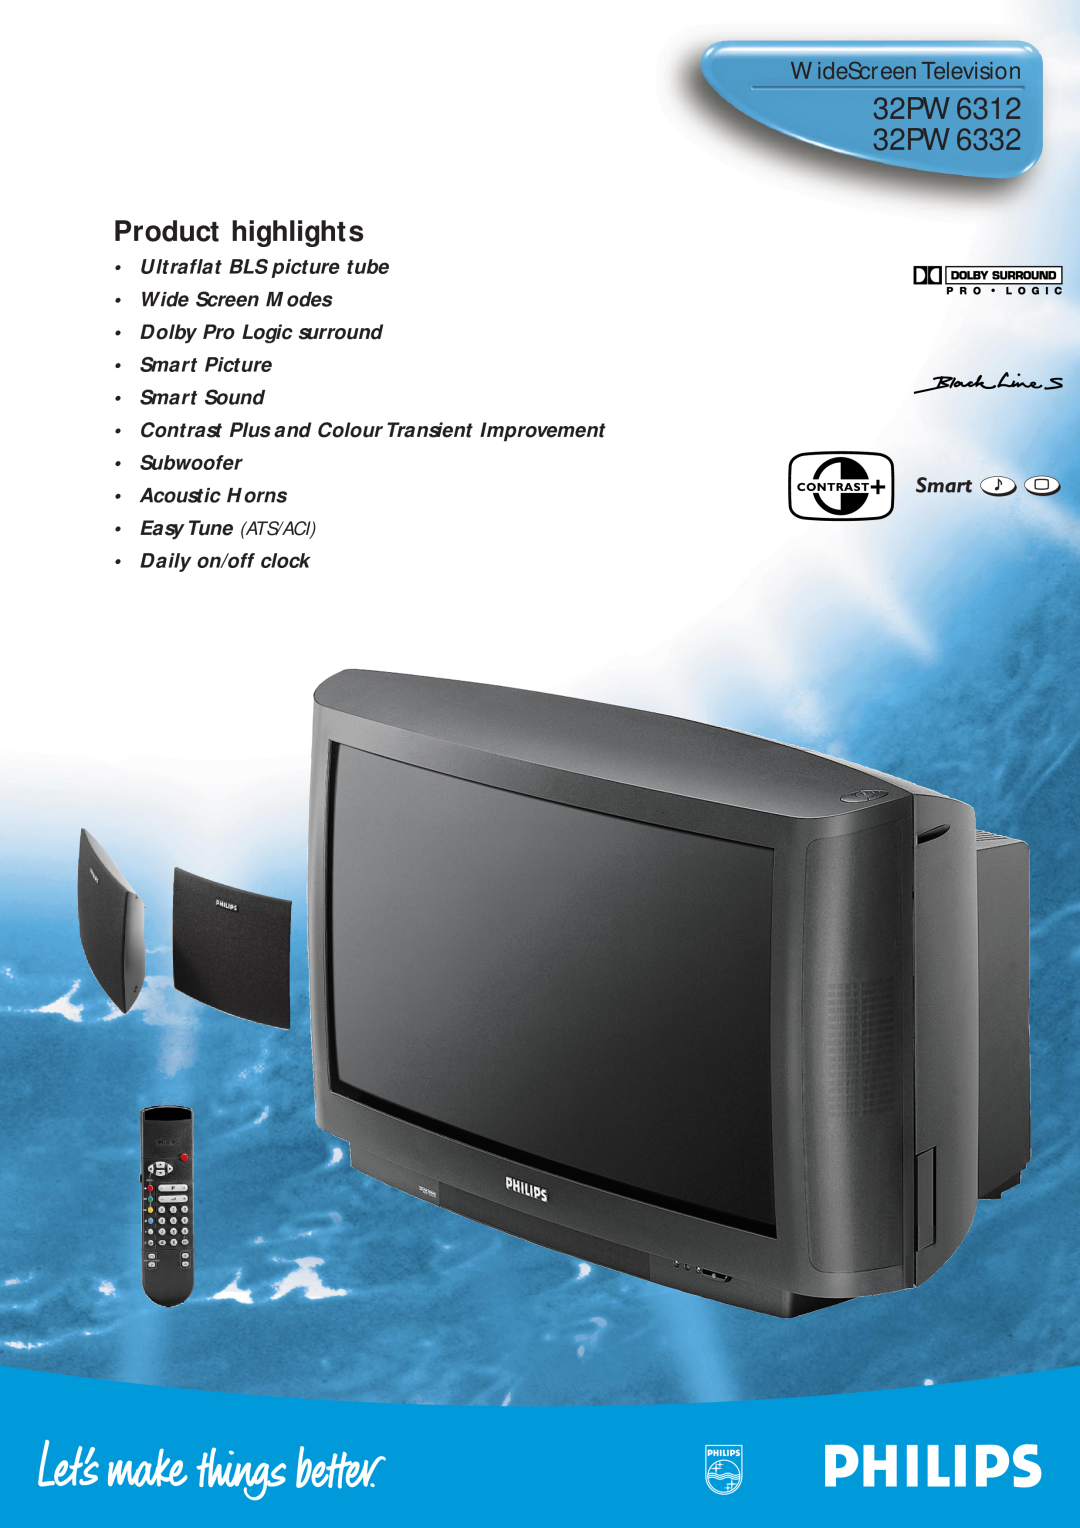 Philips manual 32PW6312 32PW6332, Product highlights, WideScreen Television, Dolby Pro Logic surround Smart Picture 